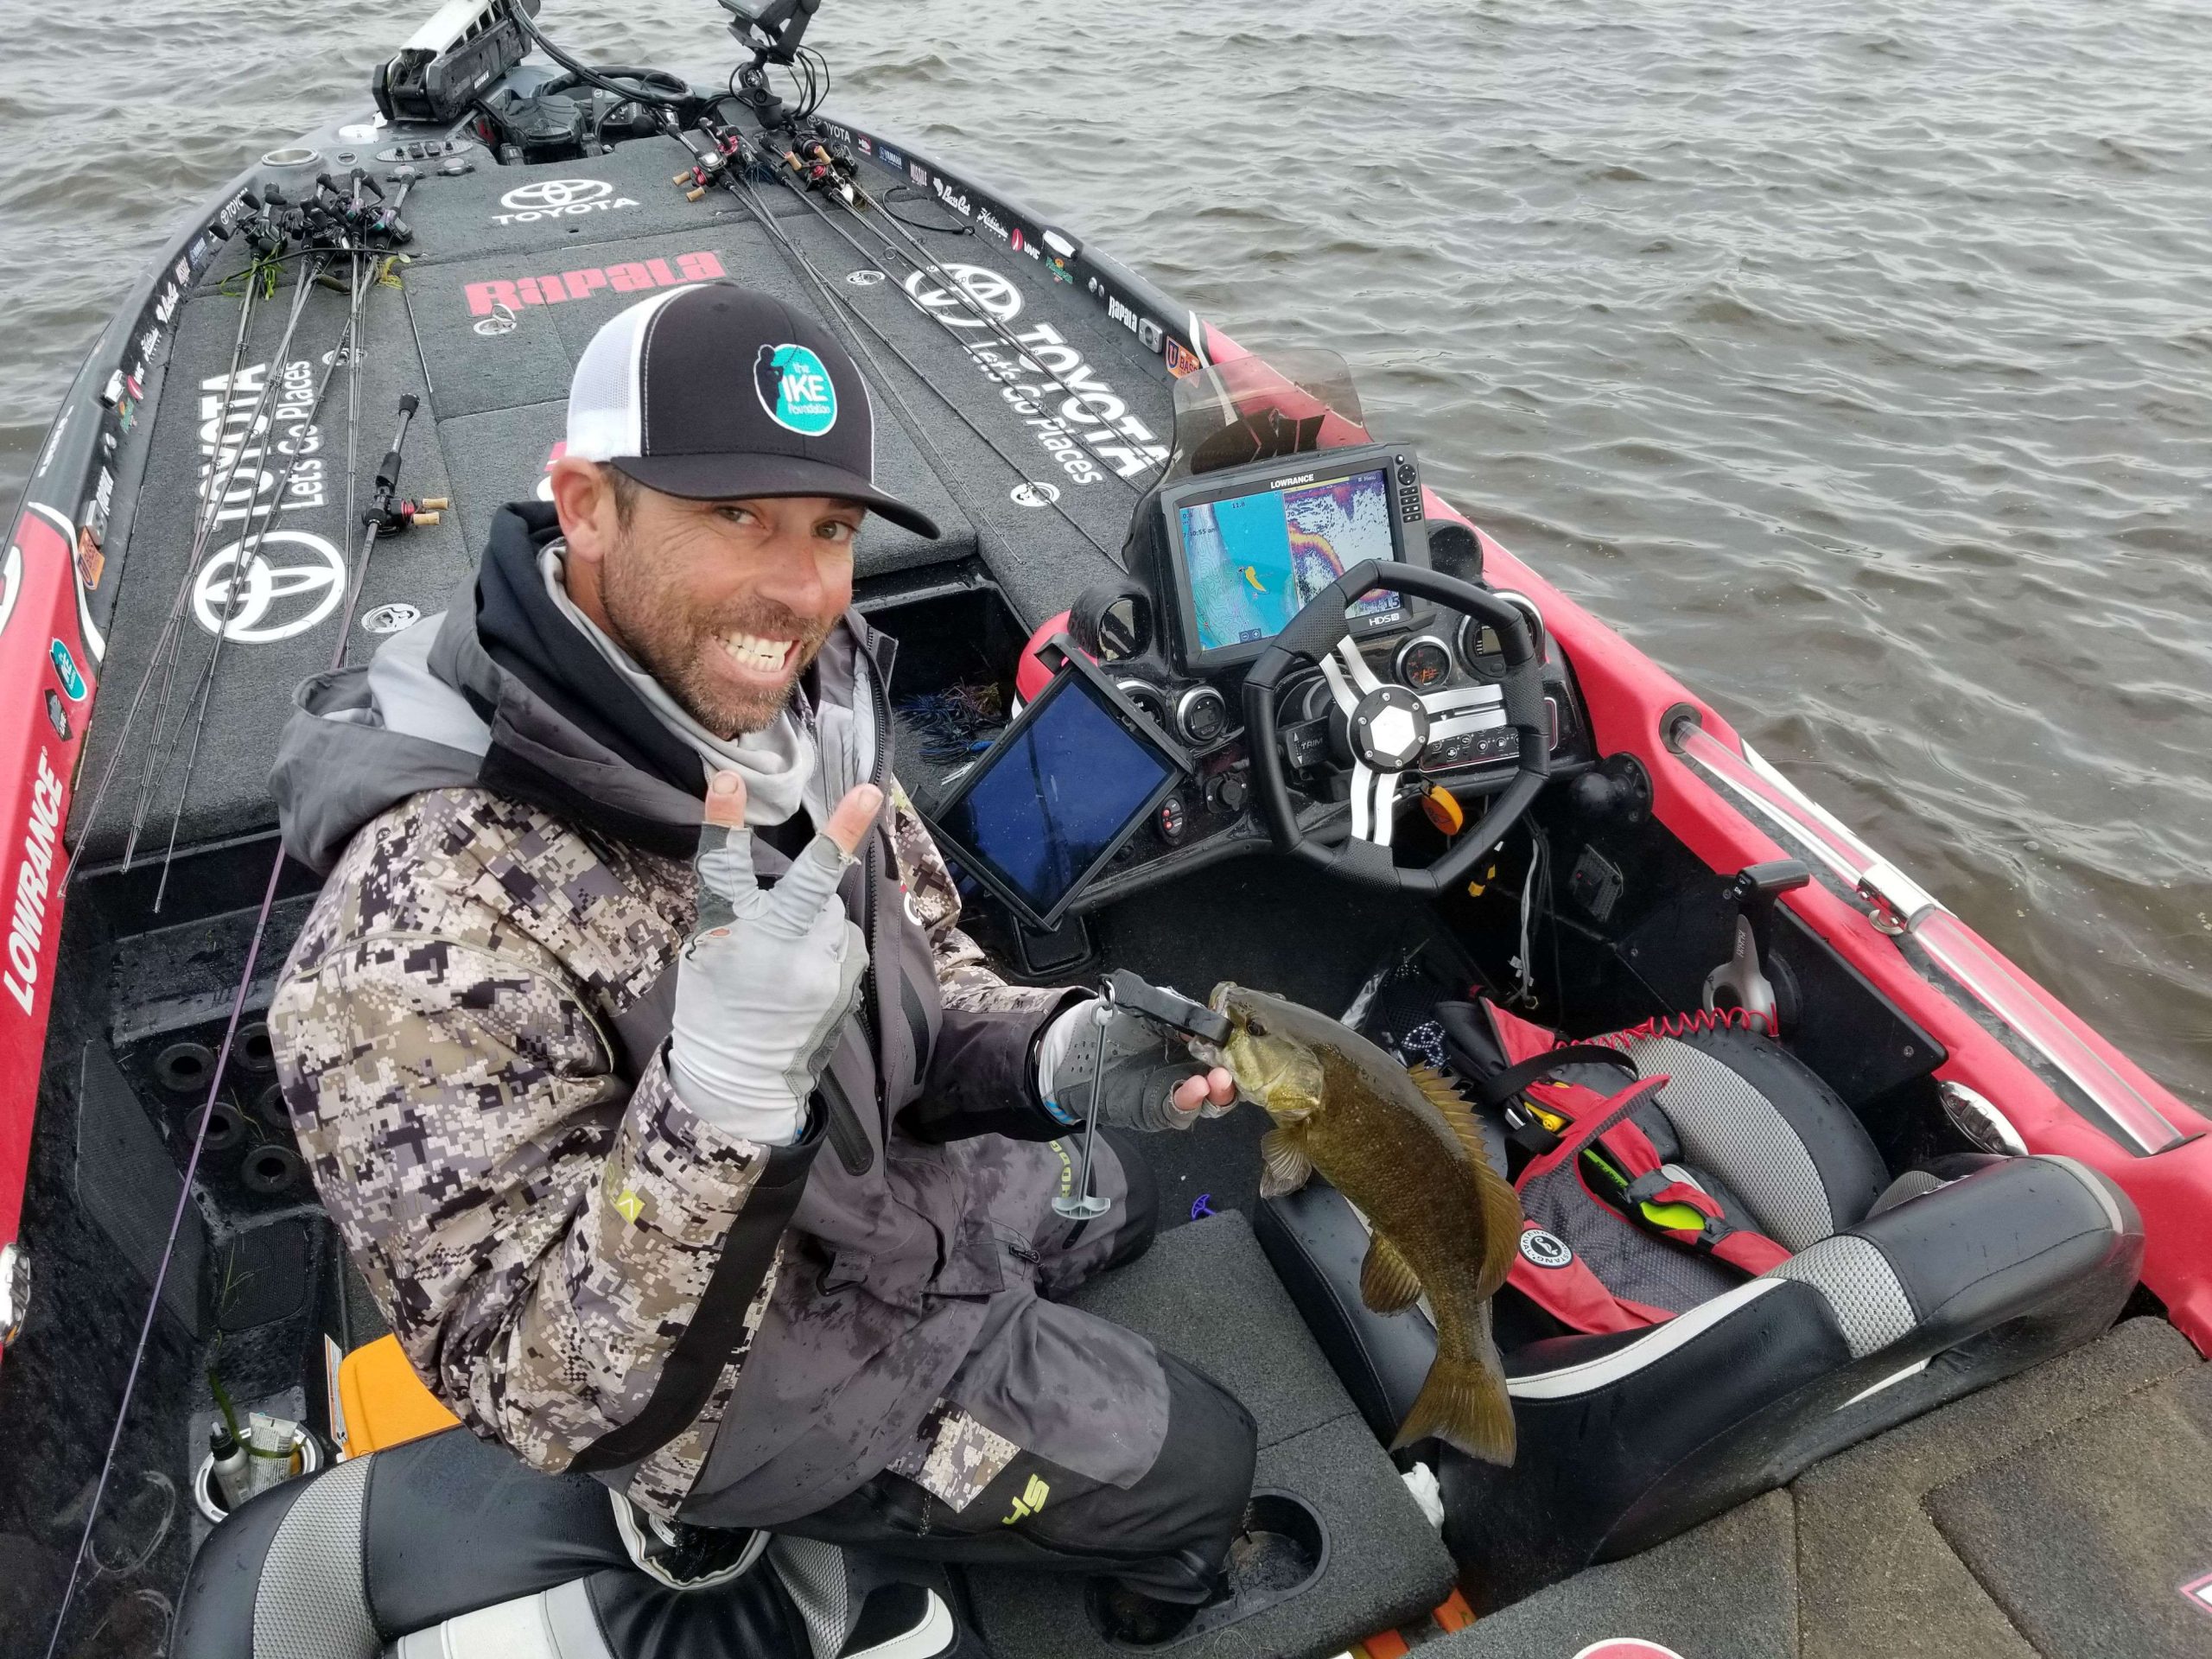 Mike Iaconelli working his Day 2 plan...